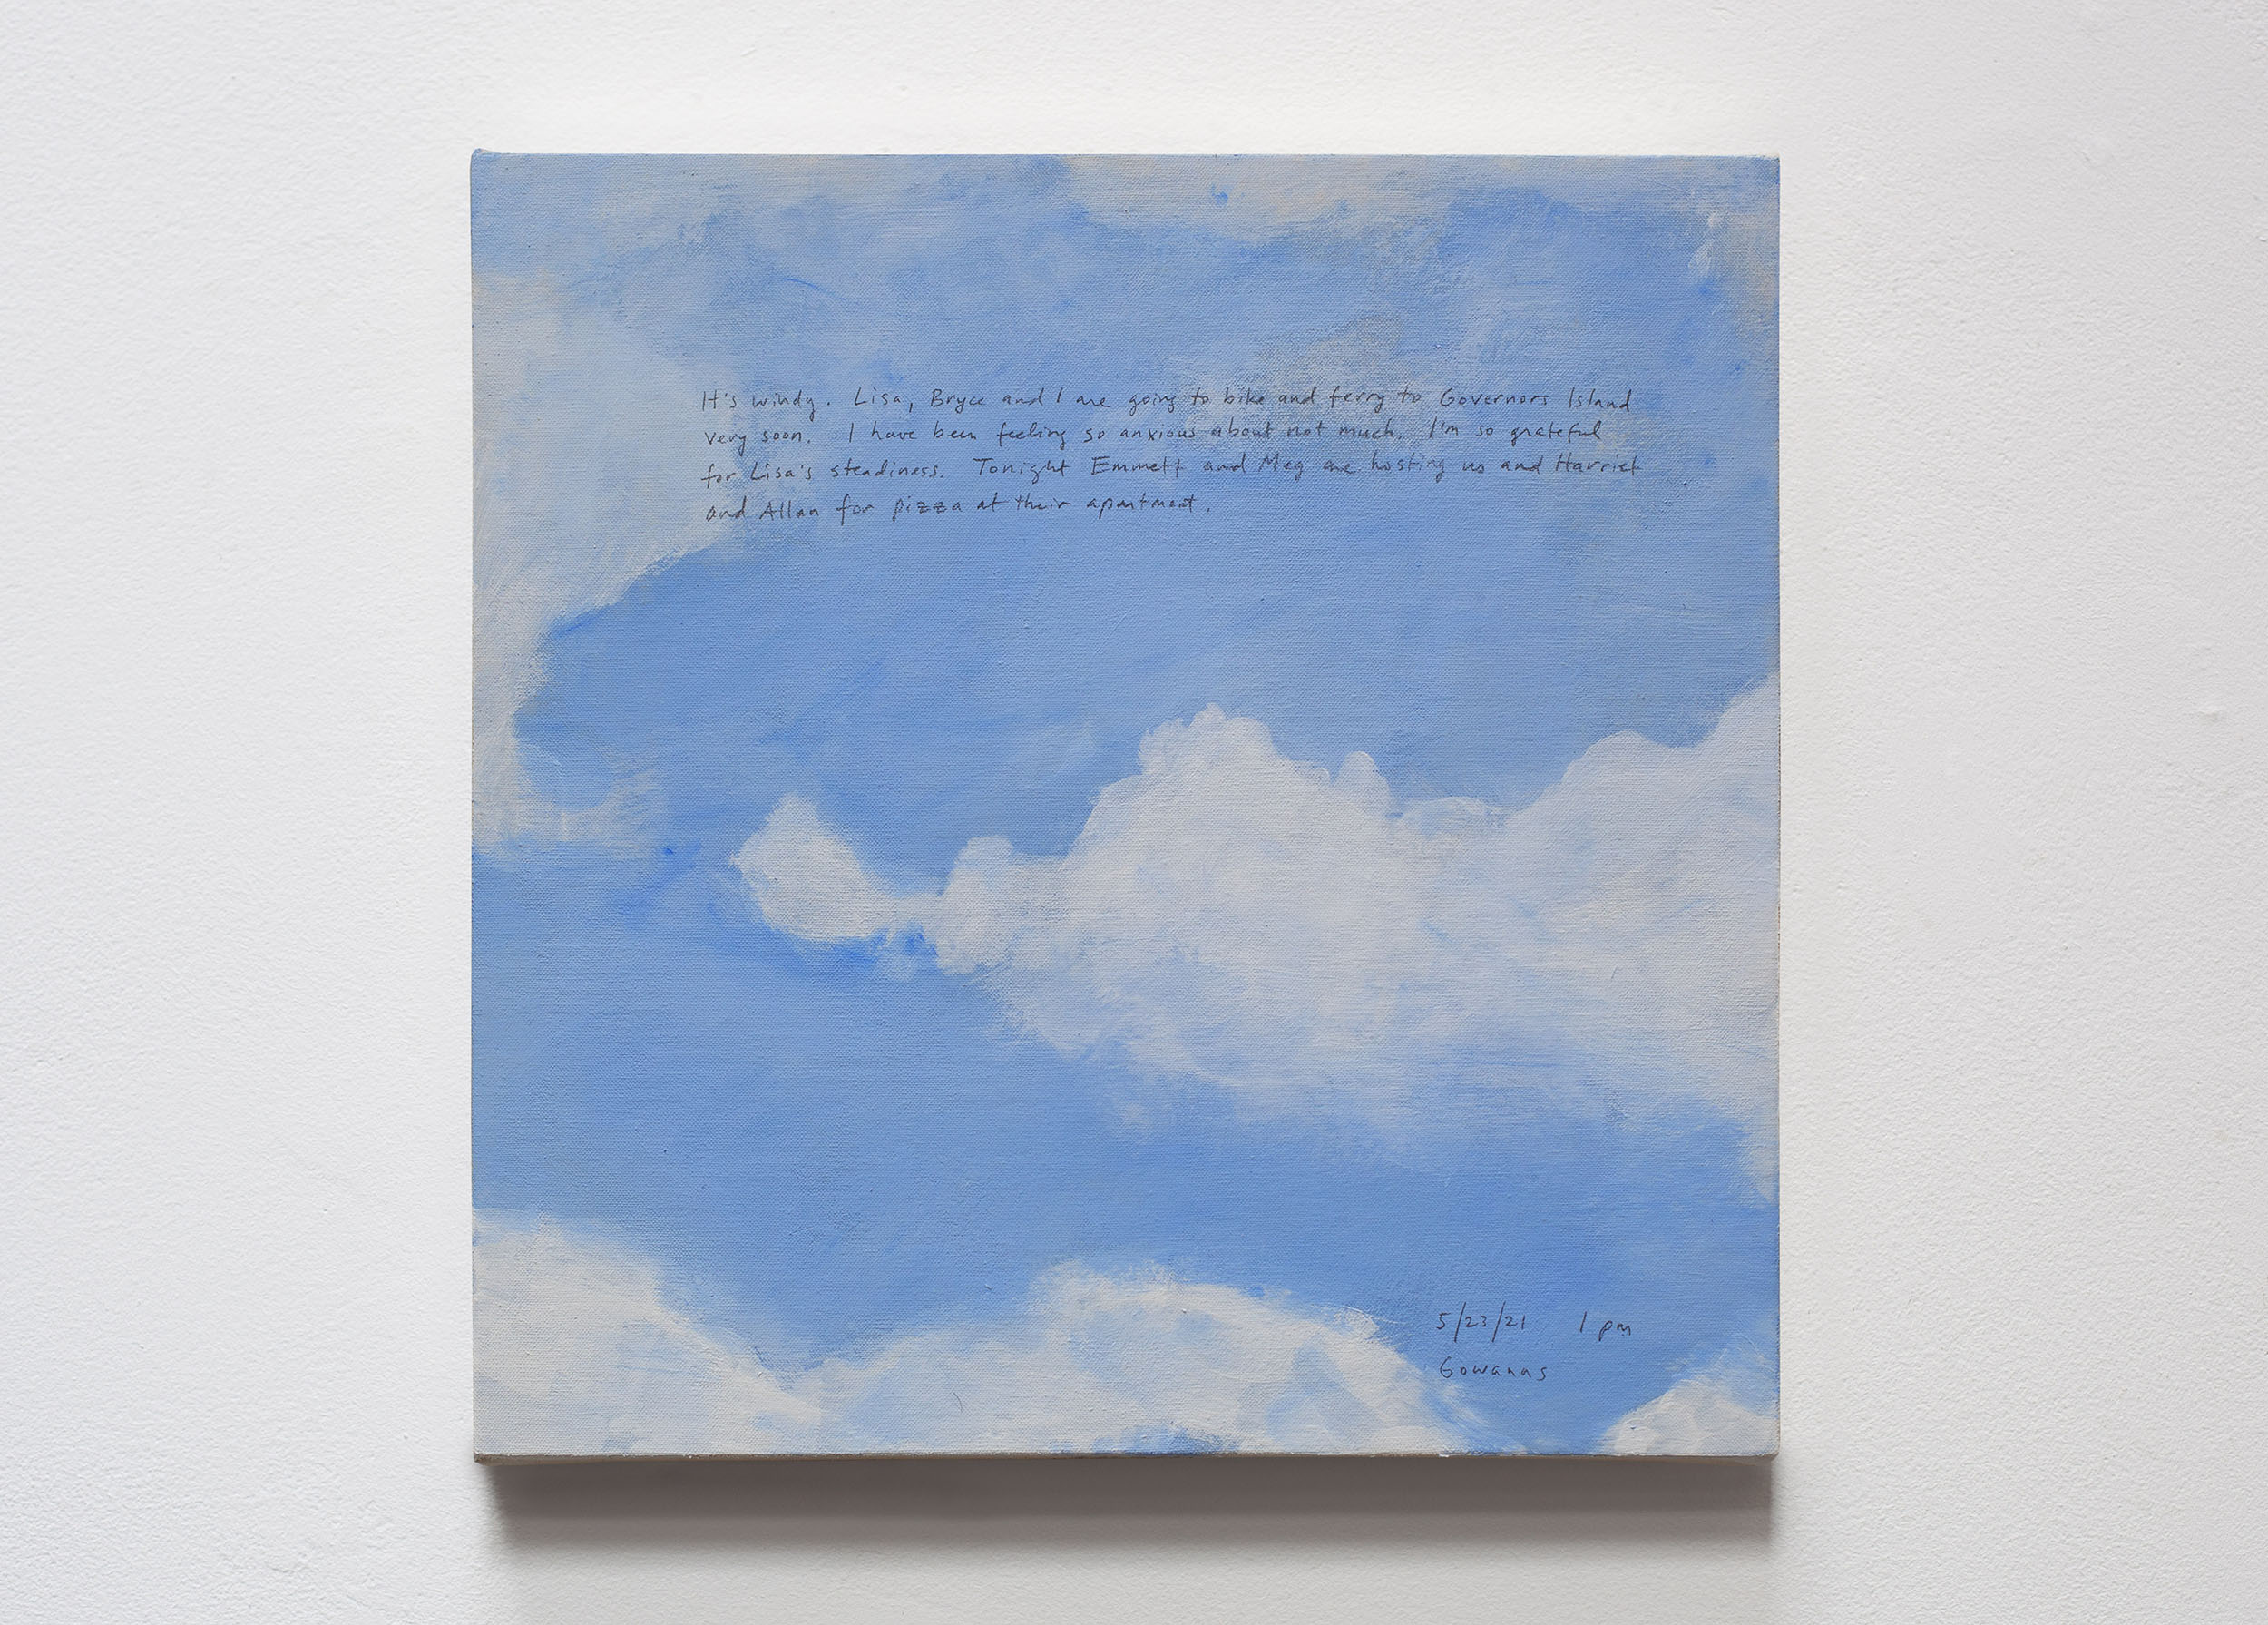 A 14 × 14 inch, acrylic painting of the sky. A journal entry is handwritten on the painting:

“It’s Windy. Lisa, Bryce, and I are going to bike and ferry to Governors Island very soon. I have been feeling so anxious about not much. I’m so grateful for Lisa’s steadiness. Tonight Emmett and Meg are hosting us and Harriet and Allan for pizza at their apartment.

5/23/21 1pm
Gowanus”